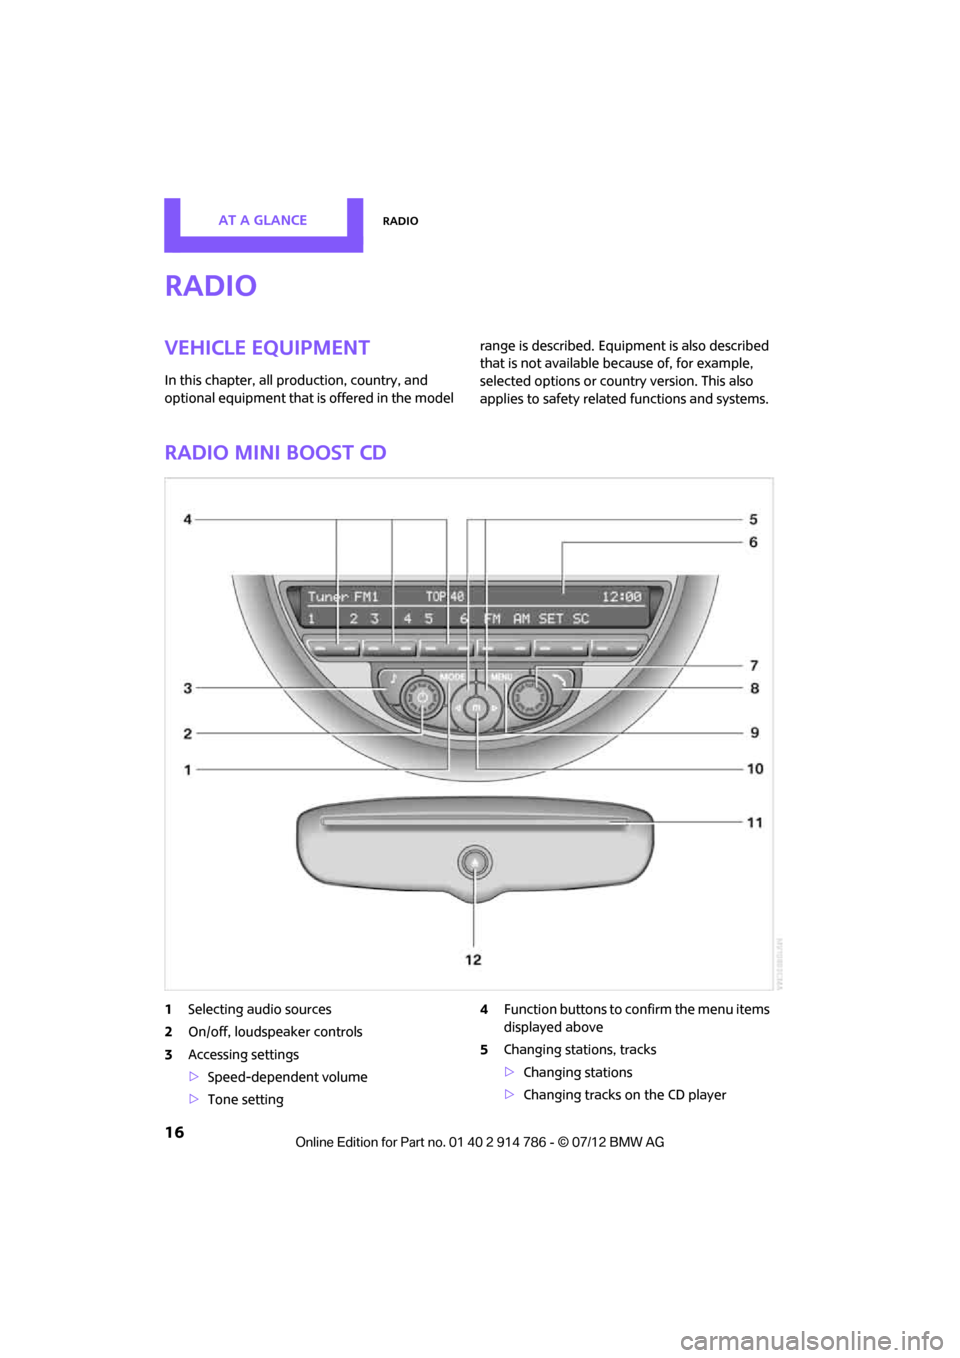 MINI Coupe 2012 User Guide AT A GLANCERadio
16
Radio
Vehicle equipment
In this chapter, all production, country, and 
optional equipment that is offered in the model range is described. Equi
pment is also described 
that is not